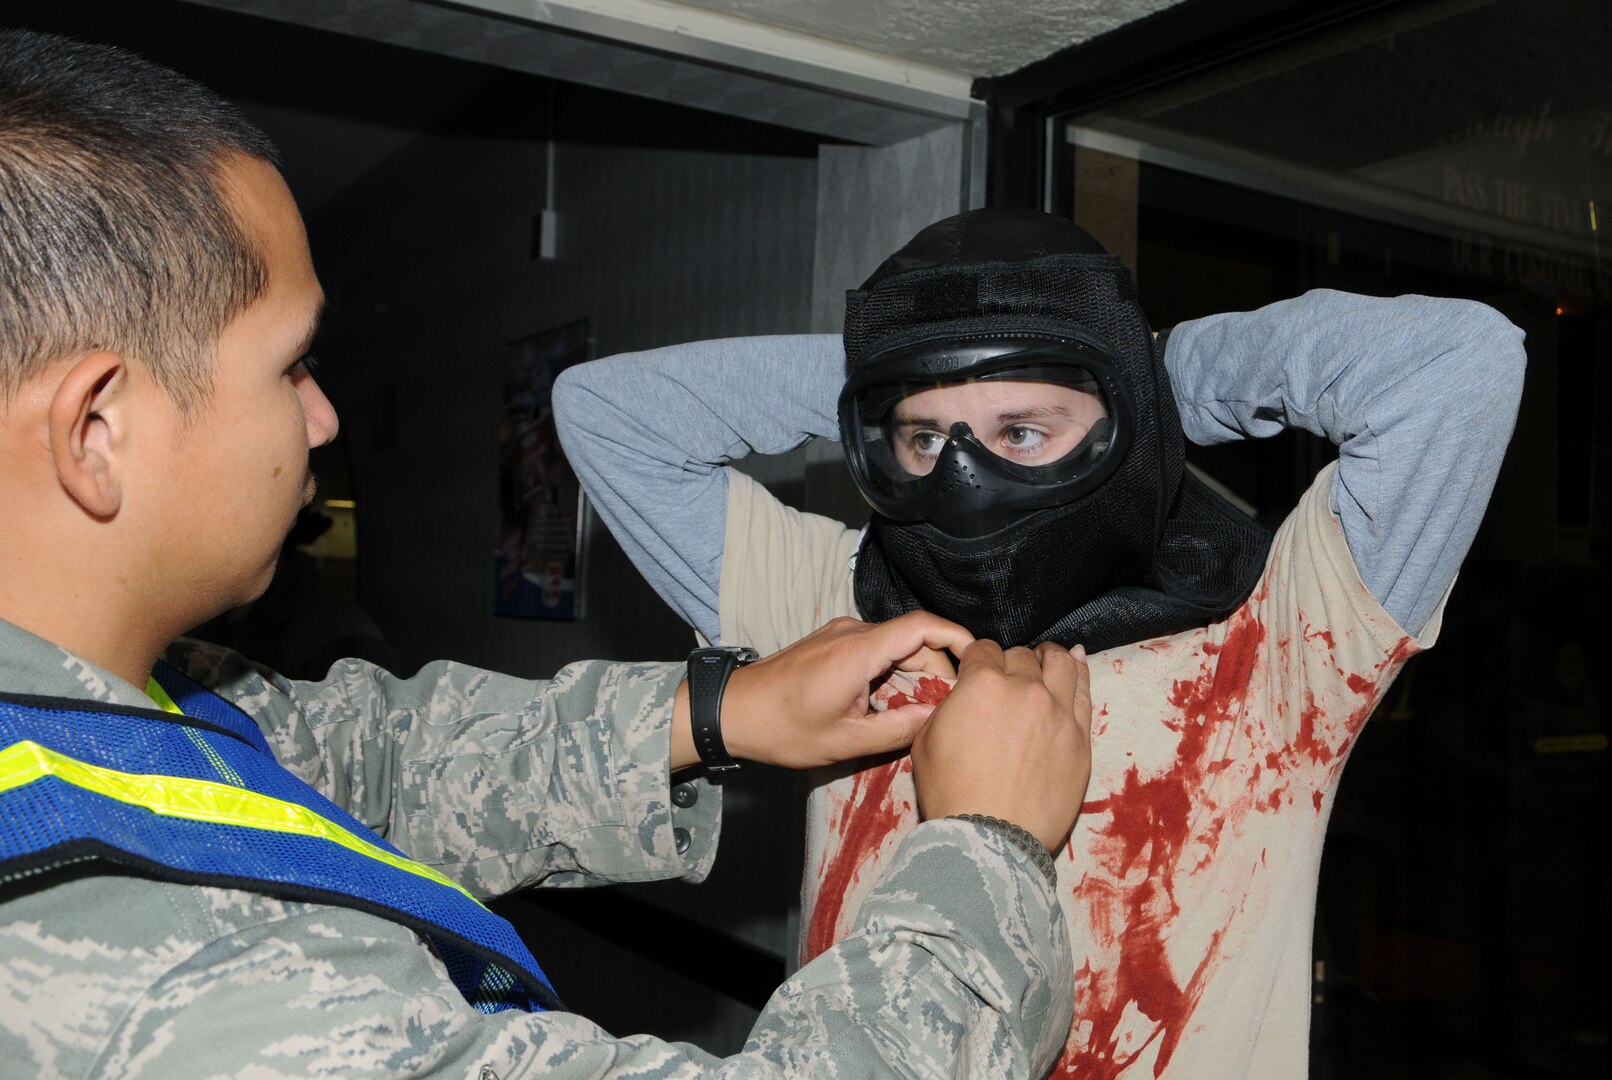 Staff Sgt. Jeff Reyes, left, helps Staff Sgt. Krystal Kanaday secure her mask prior to active shooter training at the Randolph Air Force Base old Base Exchange complex.  Randolph Security Forces conduct training in the old Randolph BX facility on how to secure a facility after a shooter has taken control of the building. (U.S. Air Force photo by Don Lindsey)